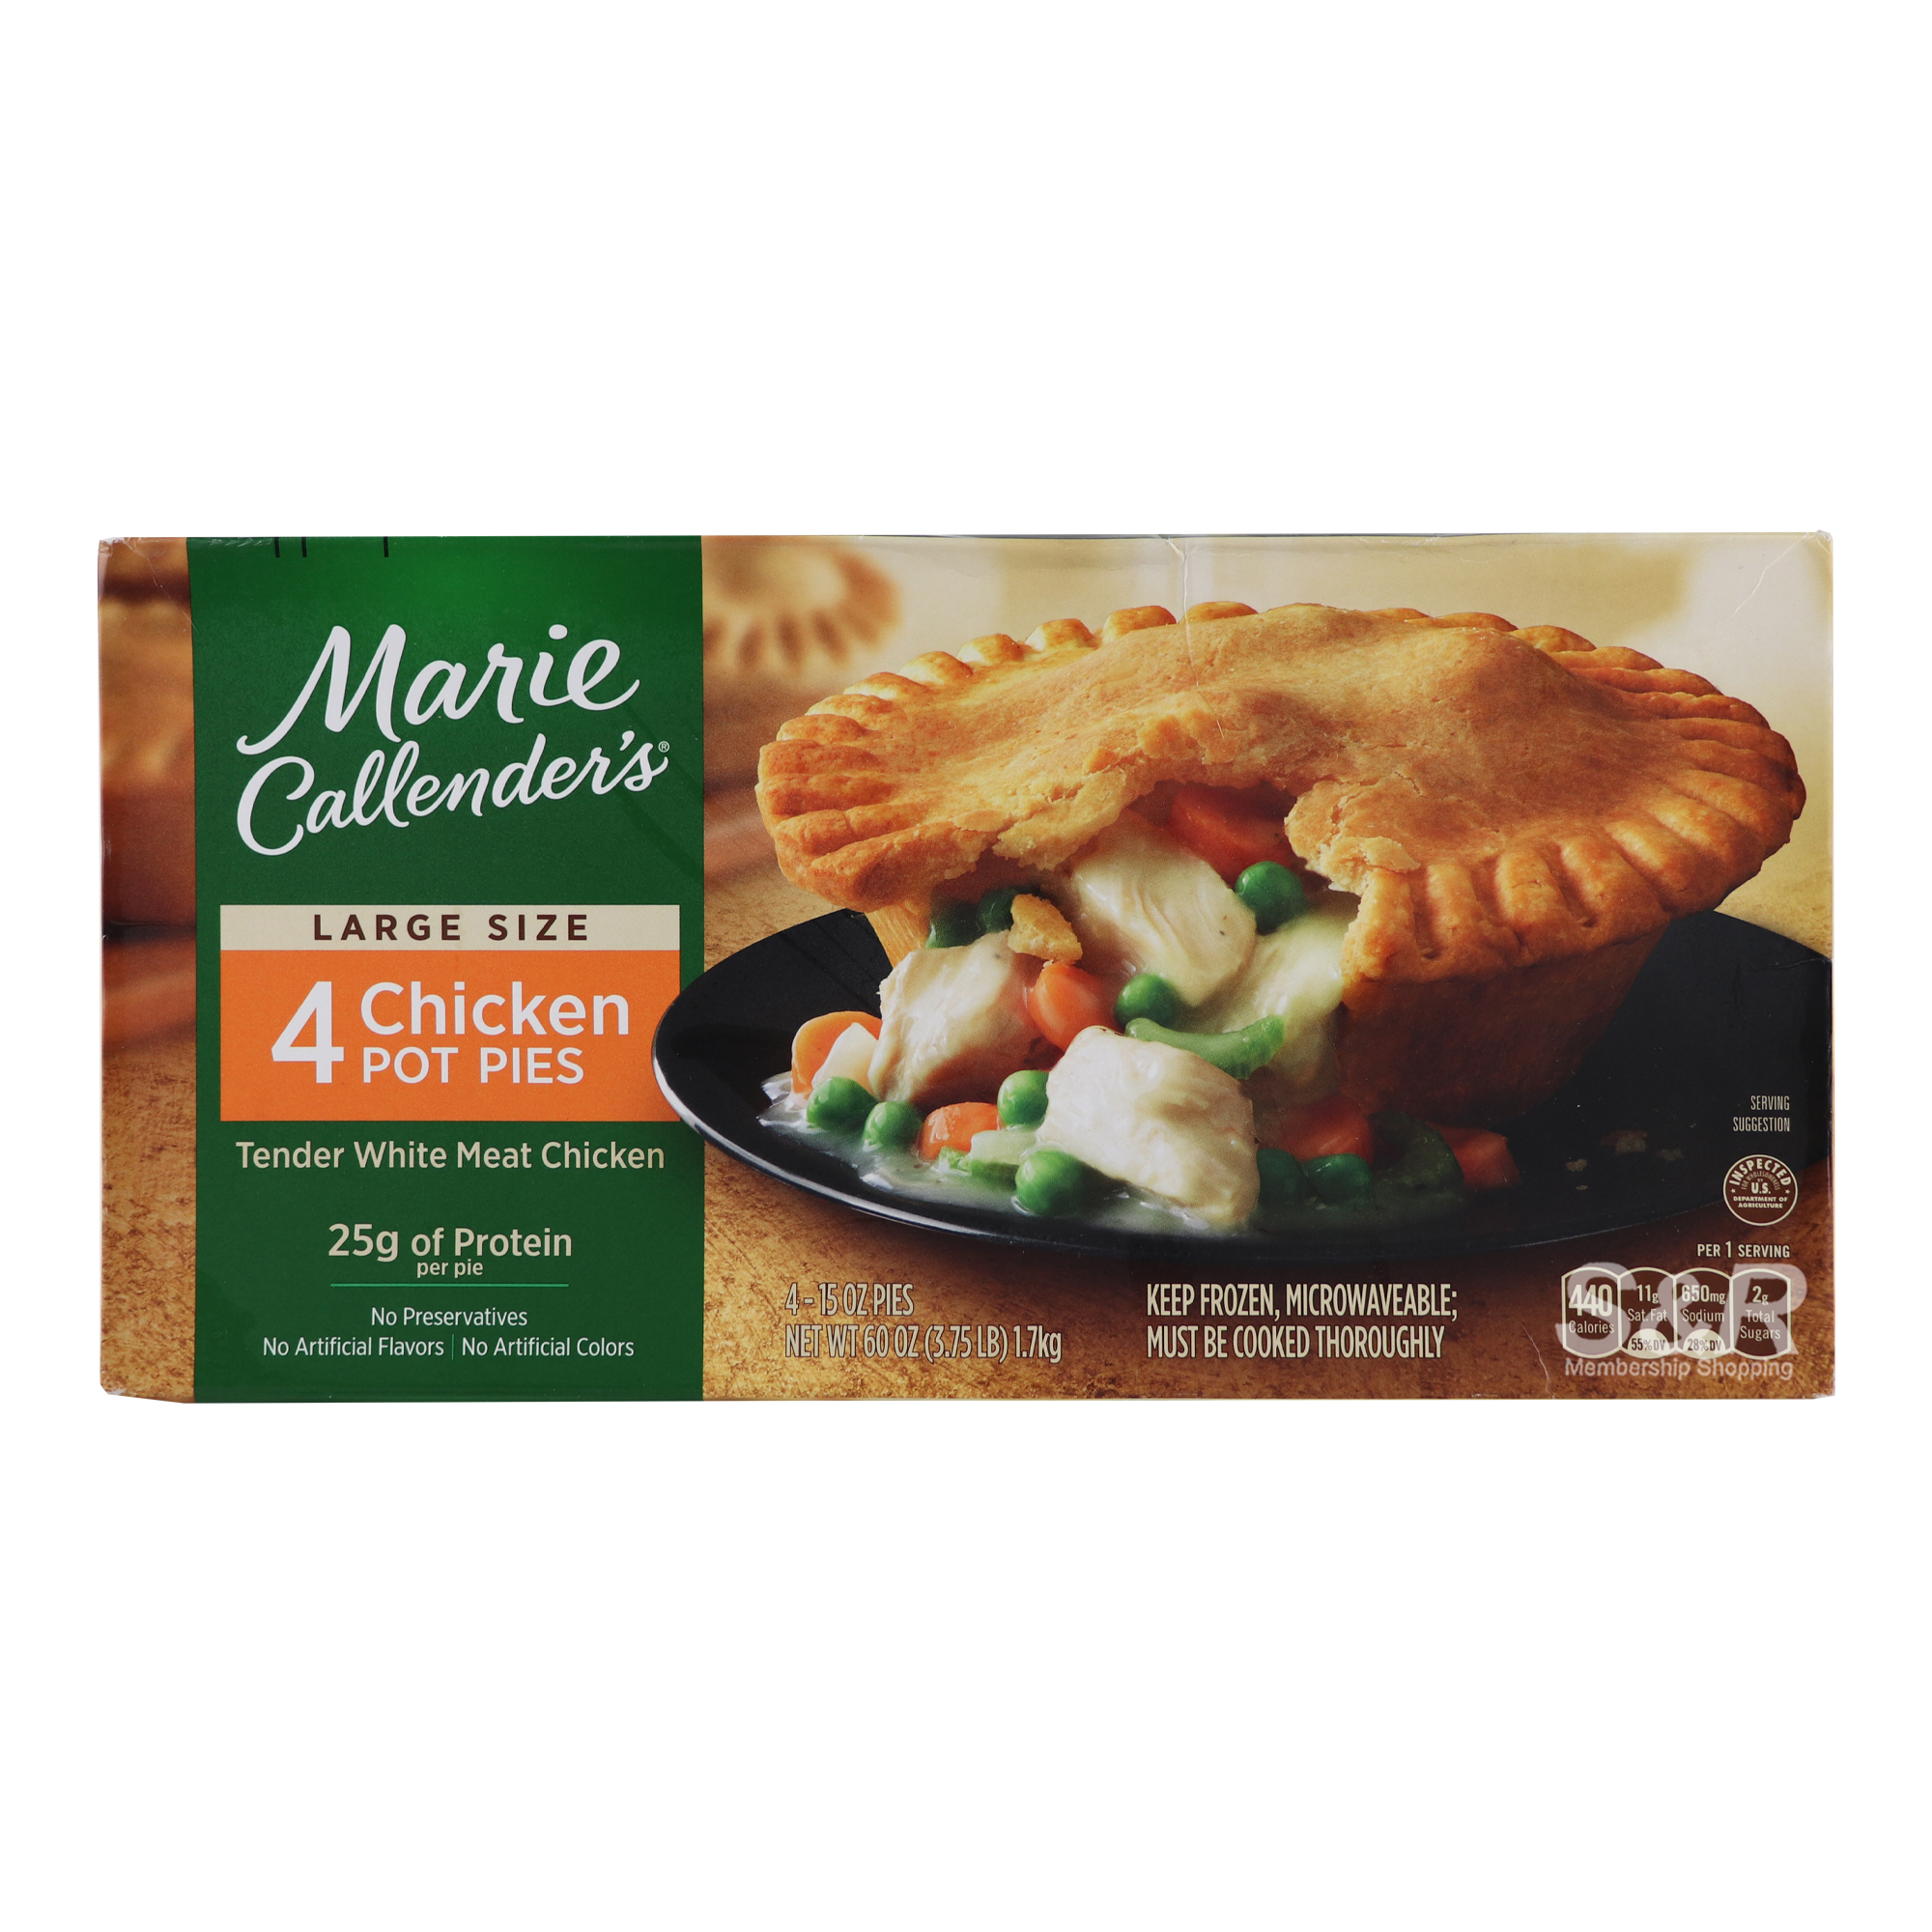 Marie Callender's Chicken Pot Pies 4 Large Size